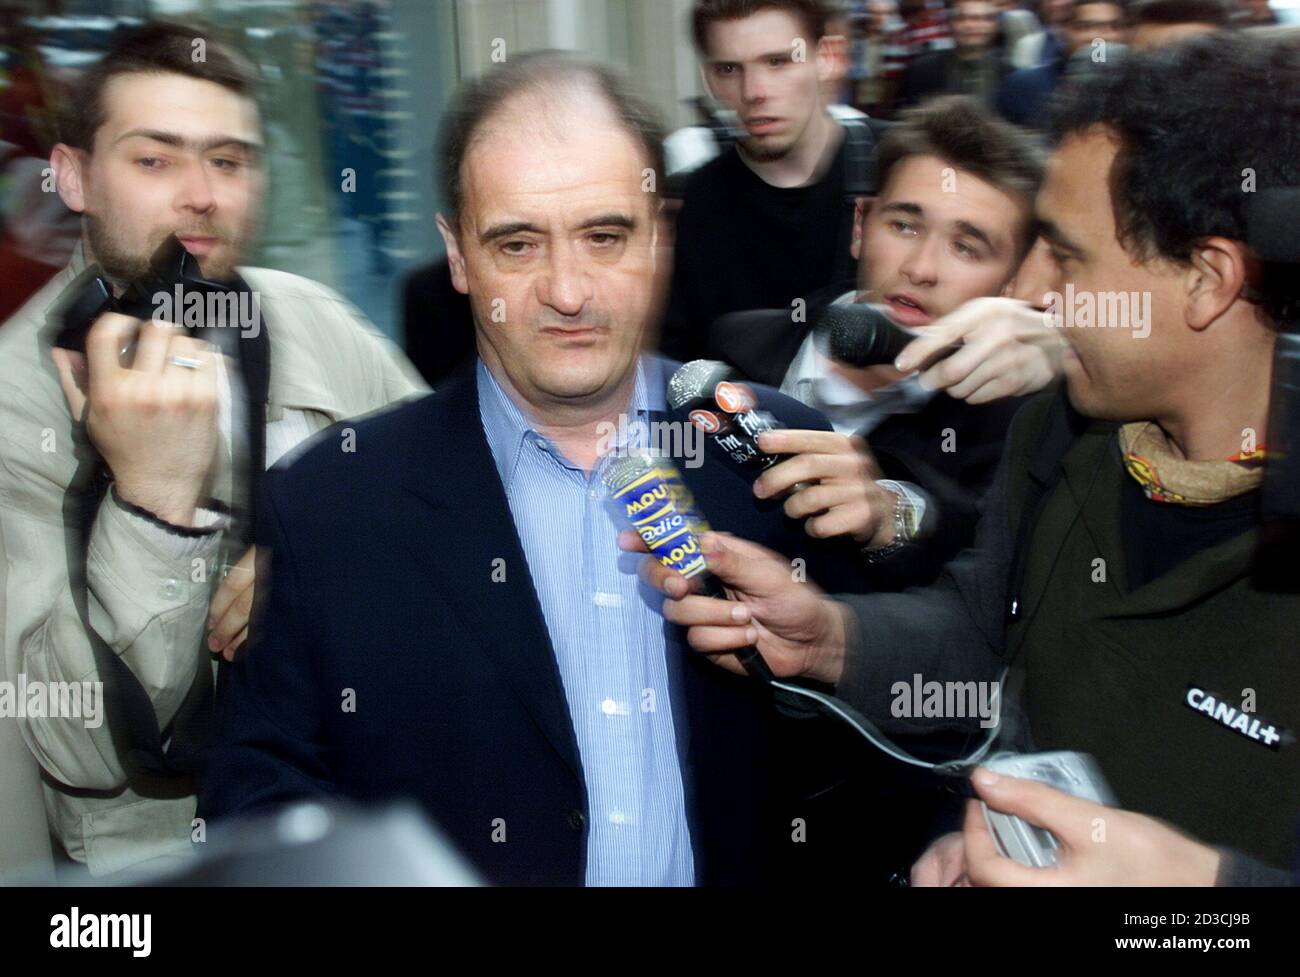 Pierre Lescure (C), dismissed French pay-TV station Canal Plus chief arrives at the Paris offices of Vivendi Universal April 17, 2002, the day after he was sacked by Jean-Marie Messier, the CEO of Vivendi Universal and owner of Vivendi's Canal Plus pay TV unit. Messier announced that Lescure would be replaced by TF1 television group senior executive Xavier Couture. Stock Photo